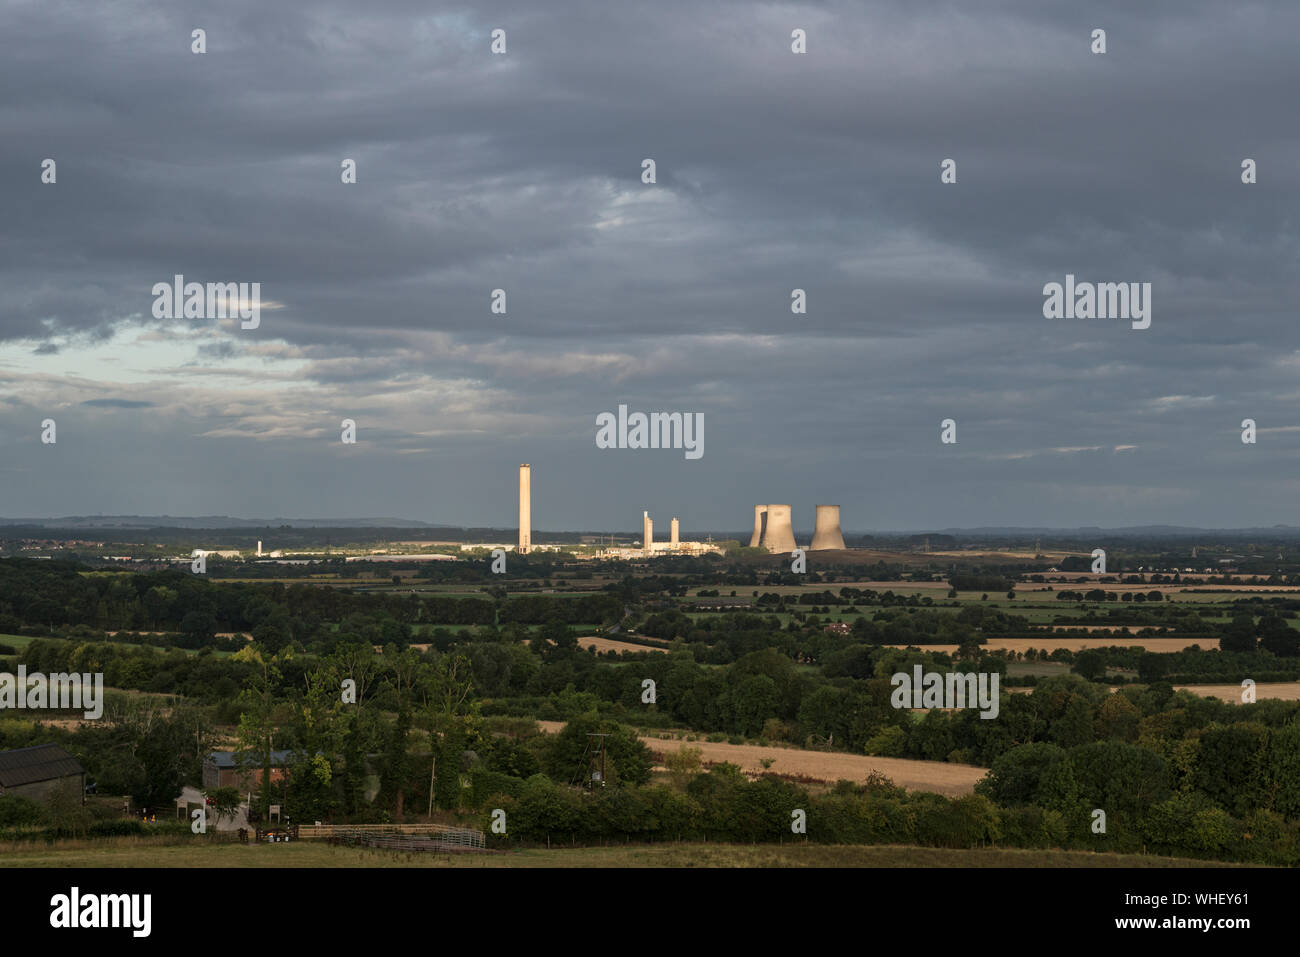 Didcot A Power Station, minutes before the last three cooling towers were demolished on the 18th August 2019 (viewed from Wittenham Clumps) Stock Photo